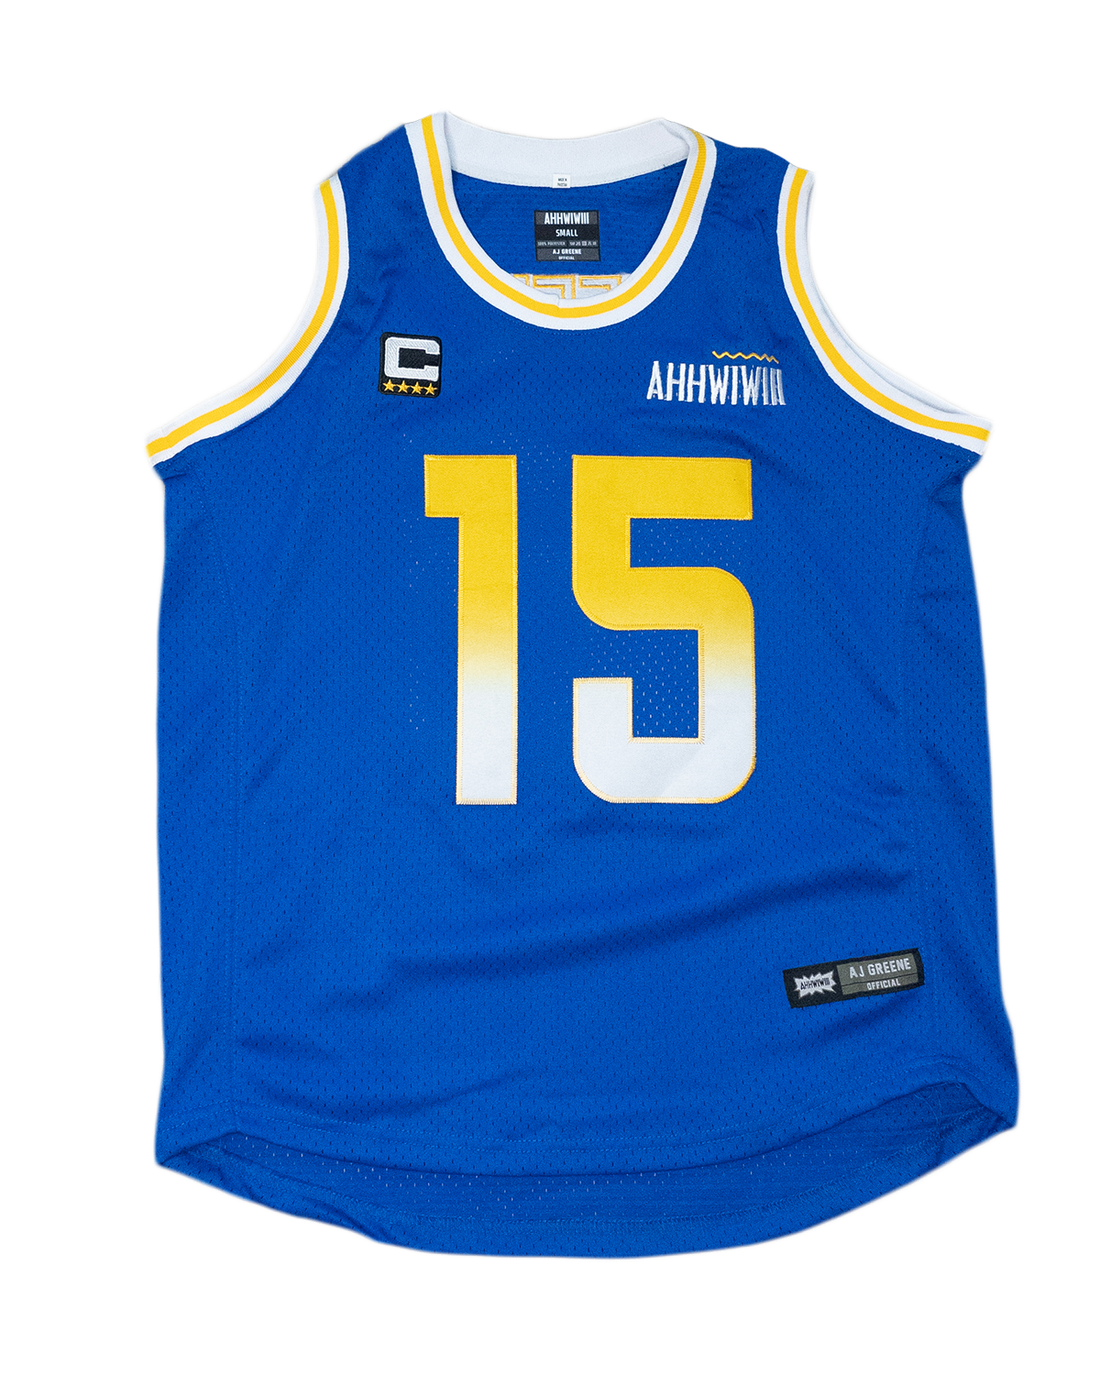 "LOS ANGELES" CAPTAIN AHHWIWIII JERSEY